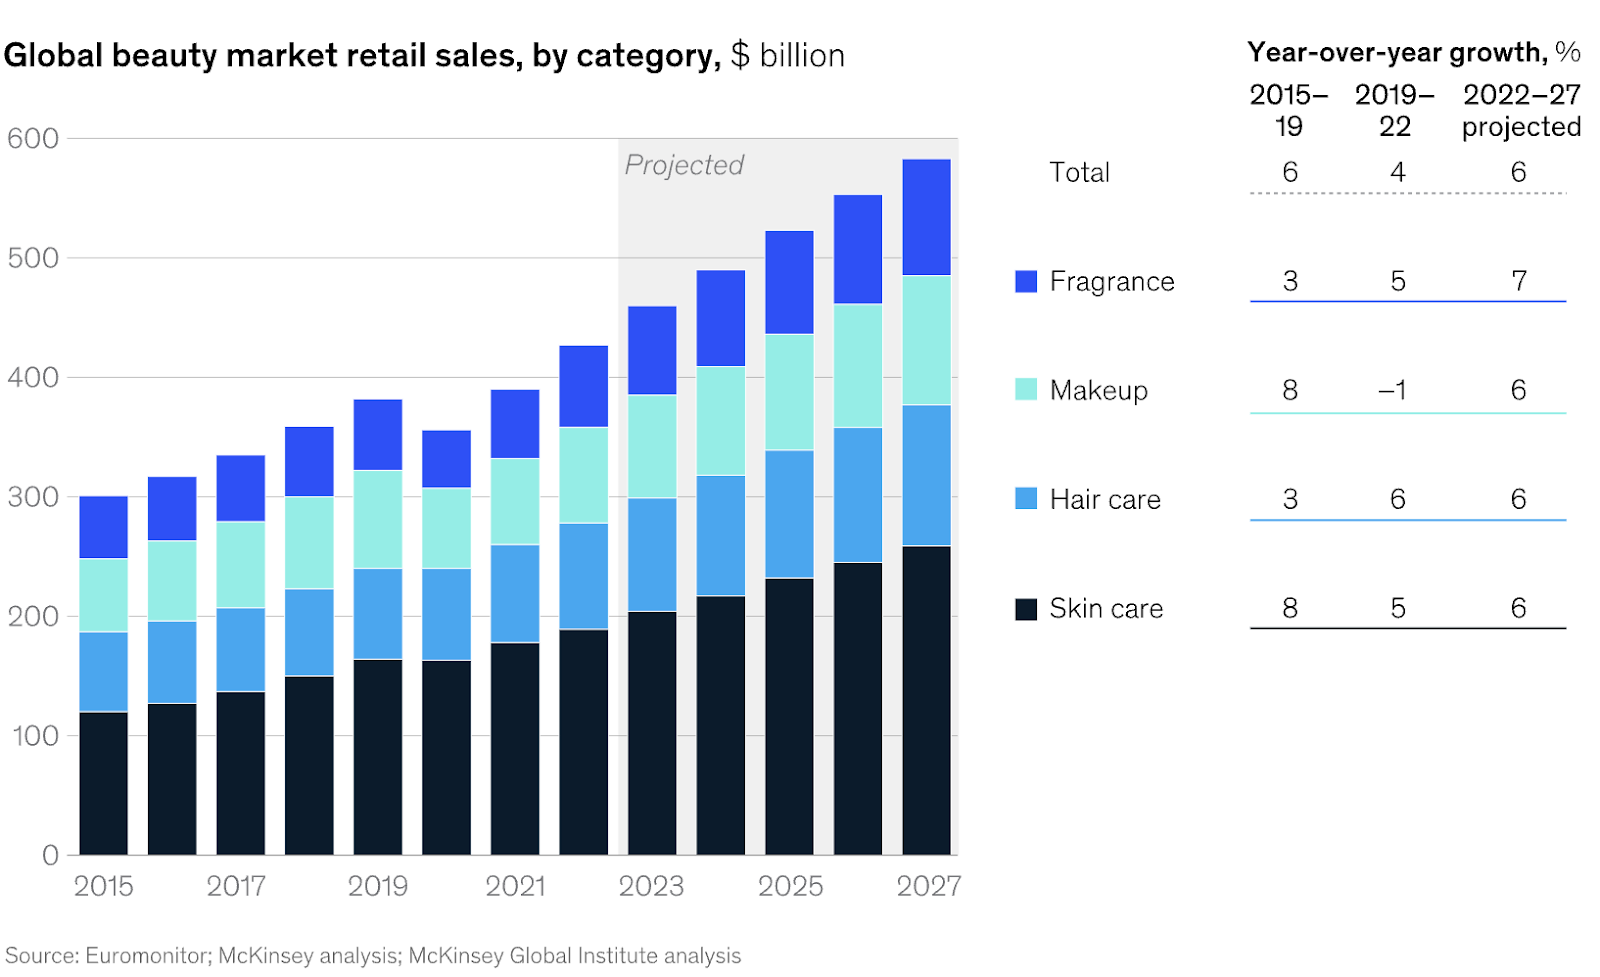 Global beauty market retail sales by category